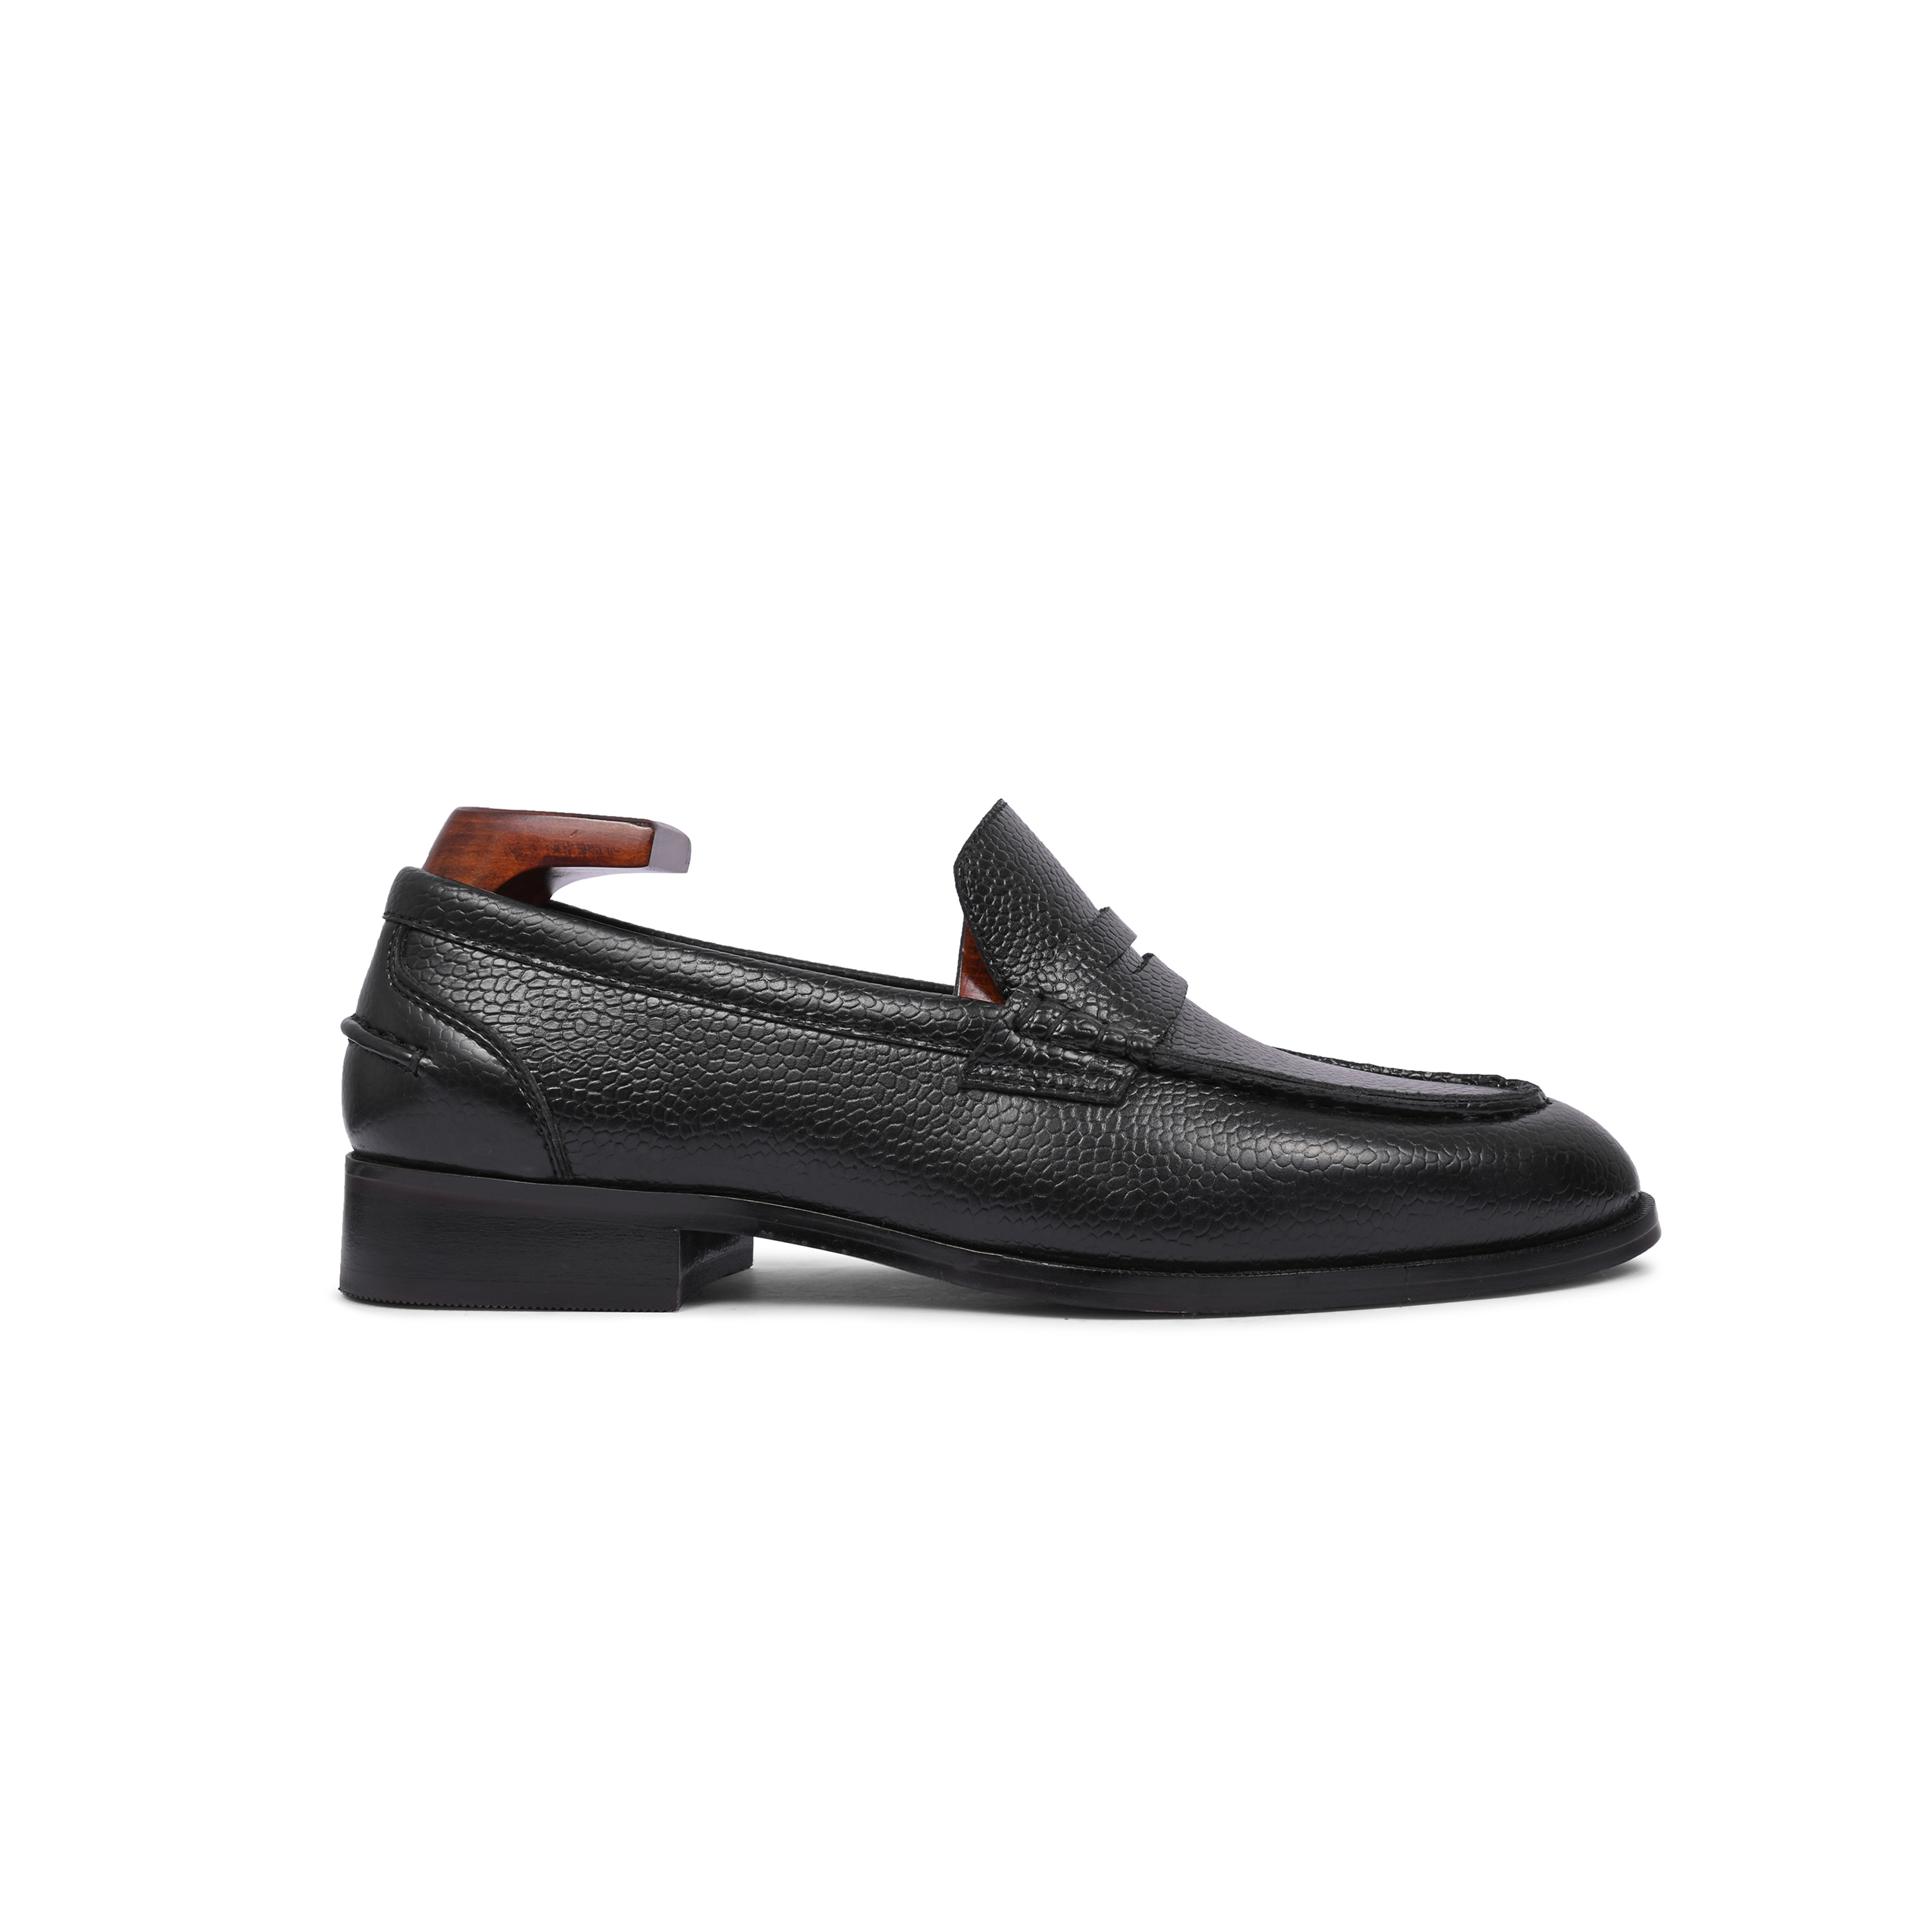 UrbanSole Loafers Shoes